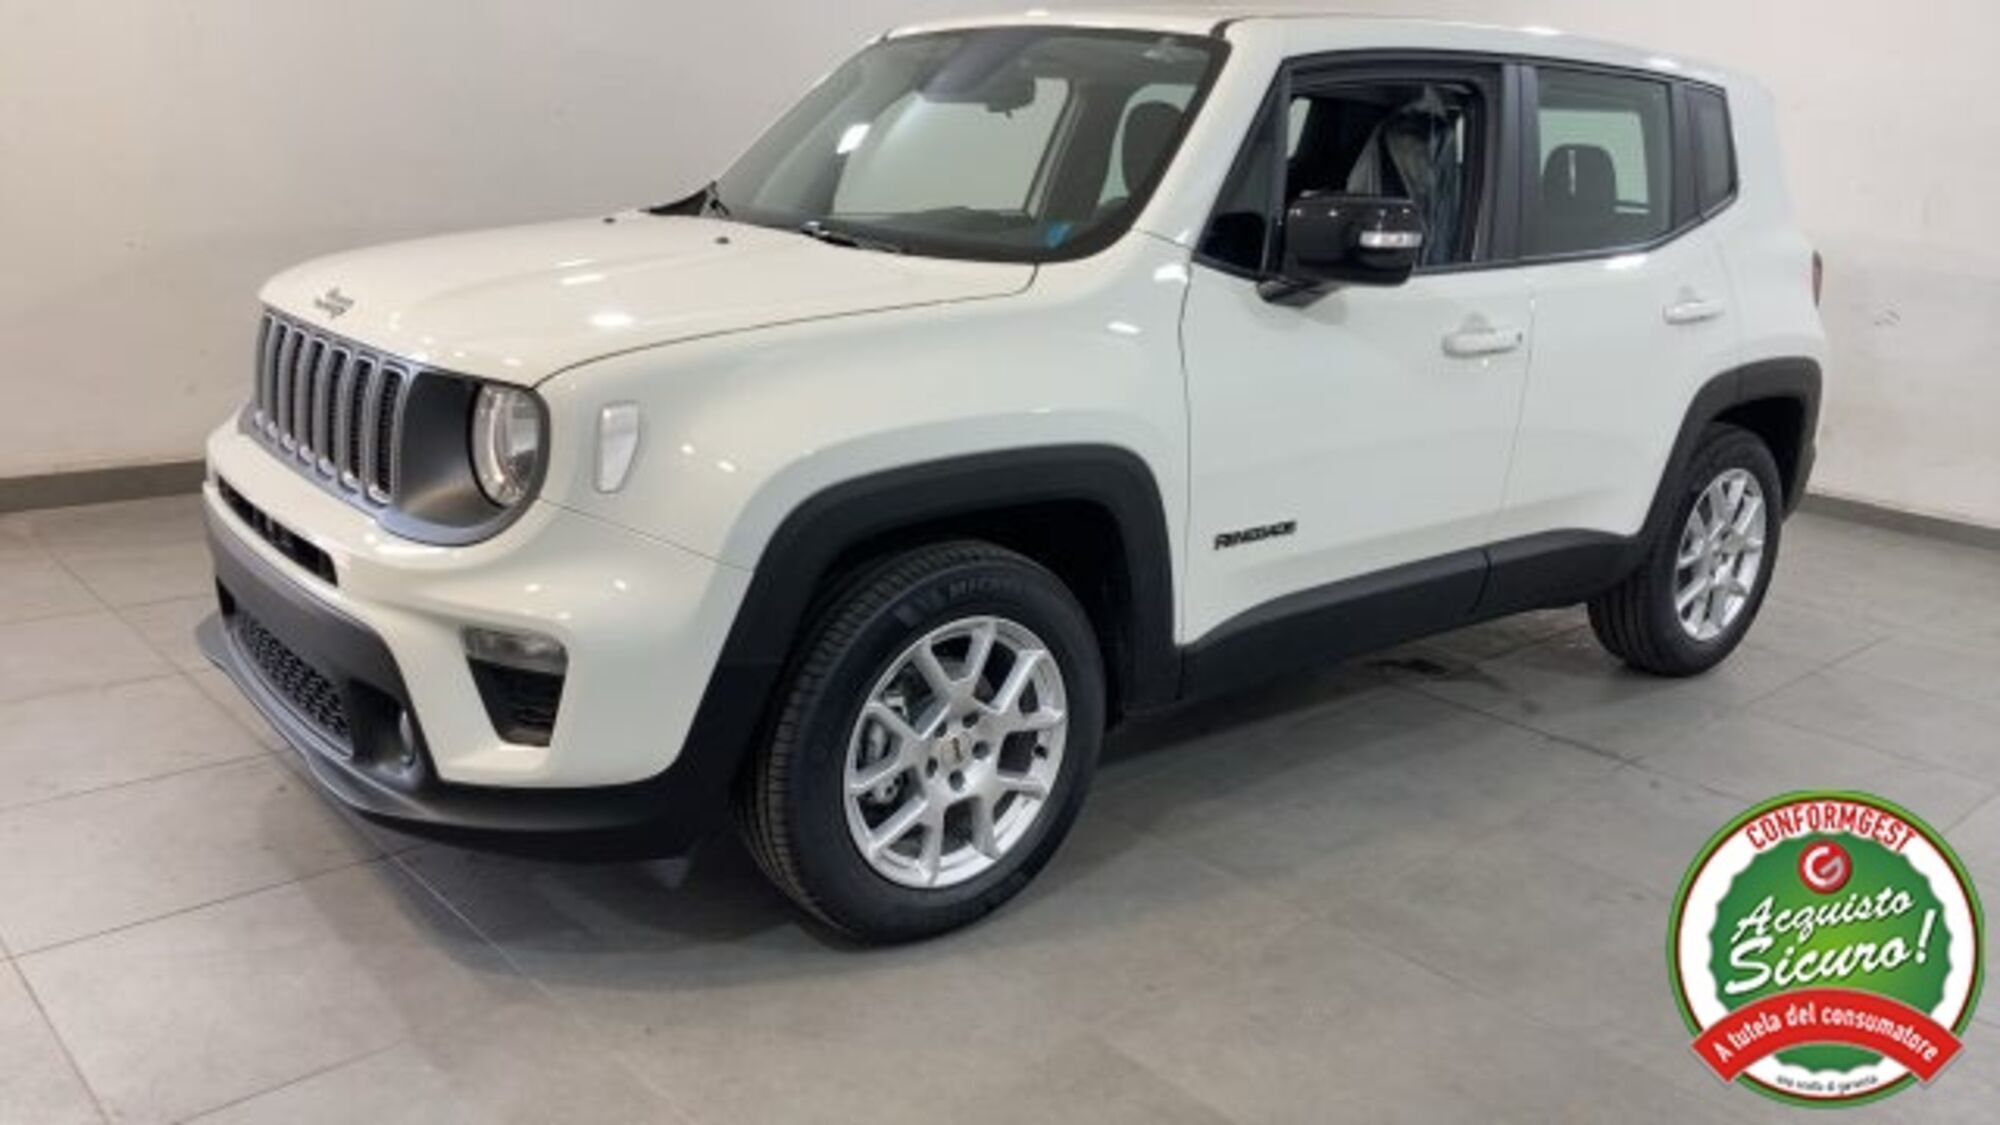 Jeep Renegade 1.6 mjt Limited 2wd 130cv nuovo